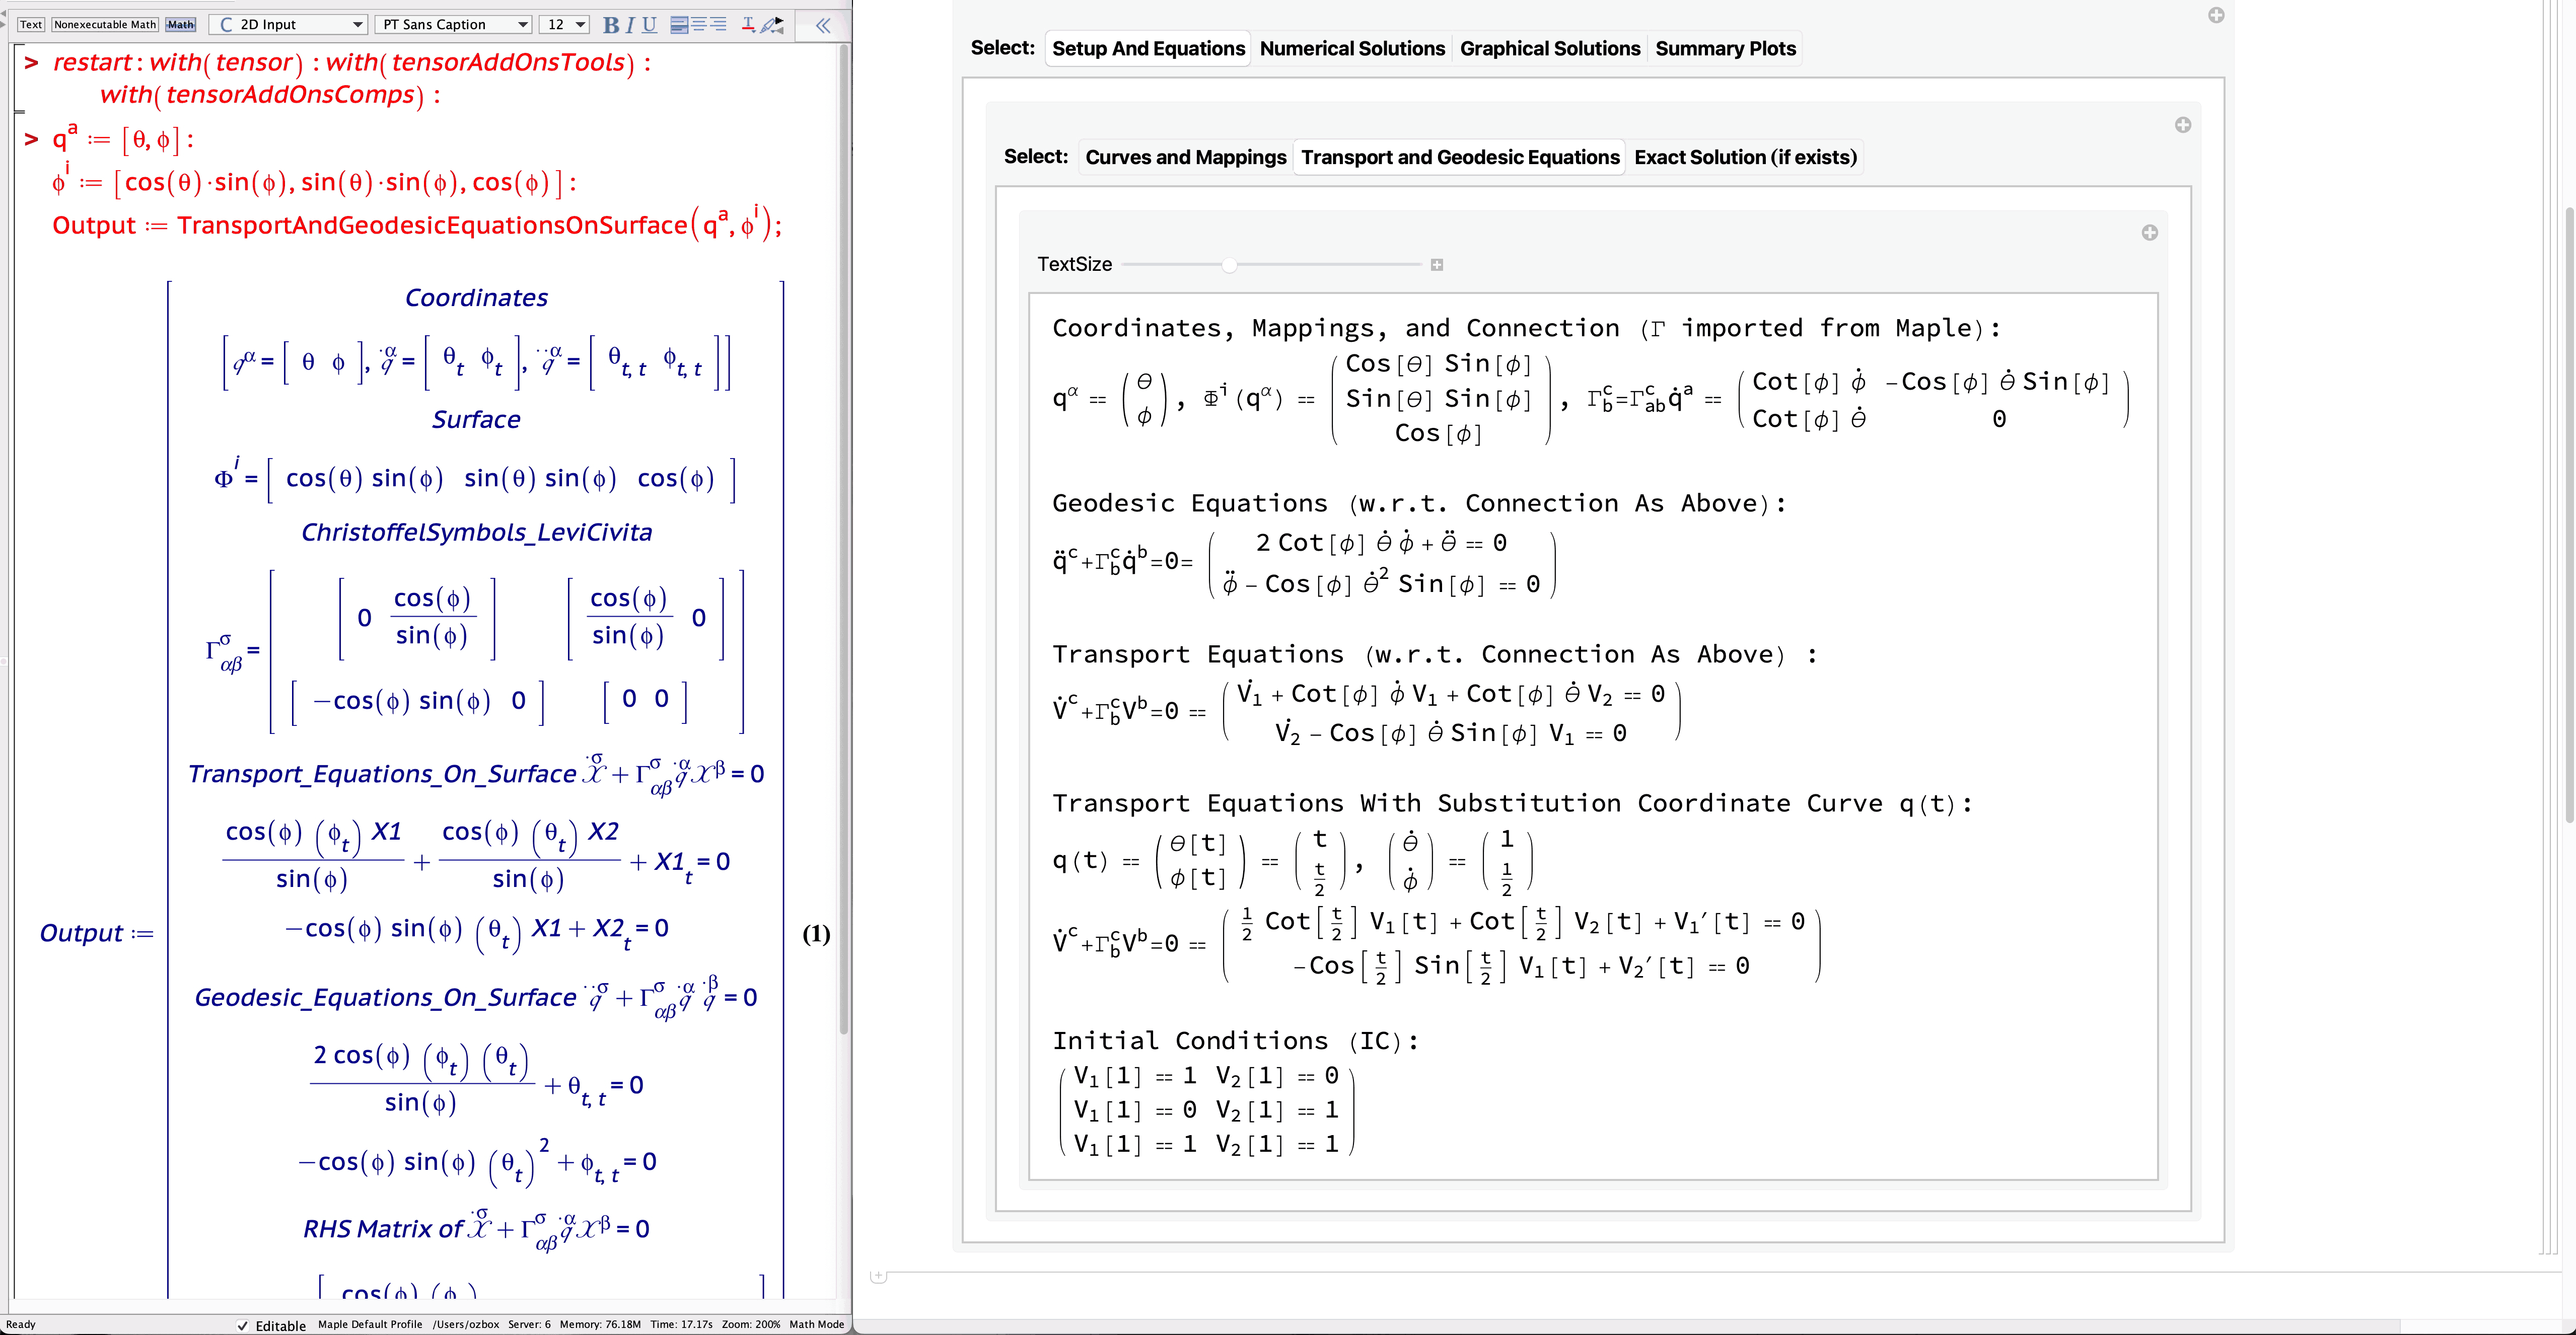 Output from Tensor Computations in Maple (MapleSoft) Become the Input to Mathematica (Wolfram Research) for Creating Geometric Plots